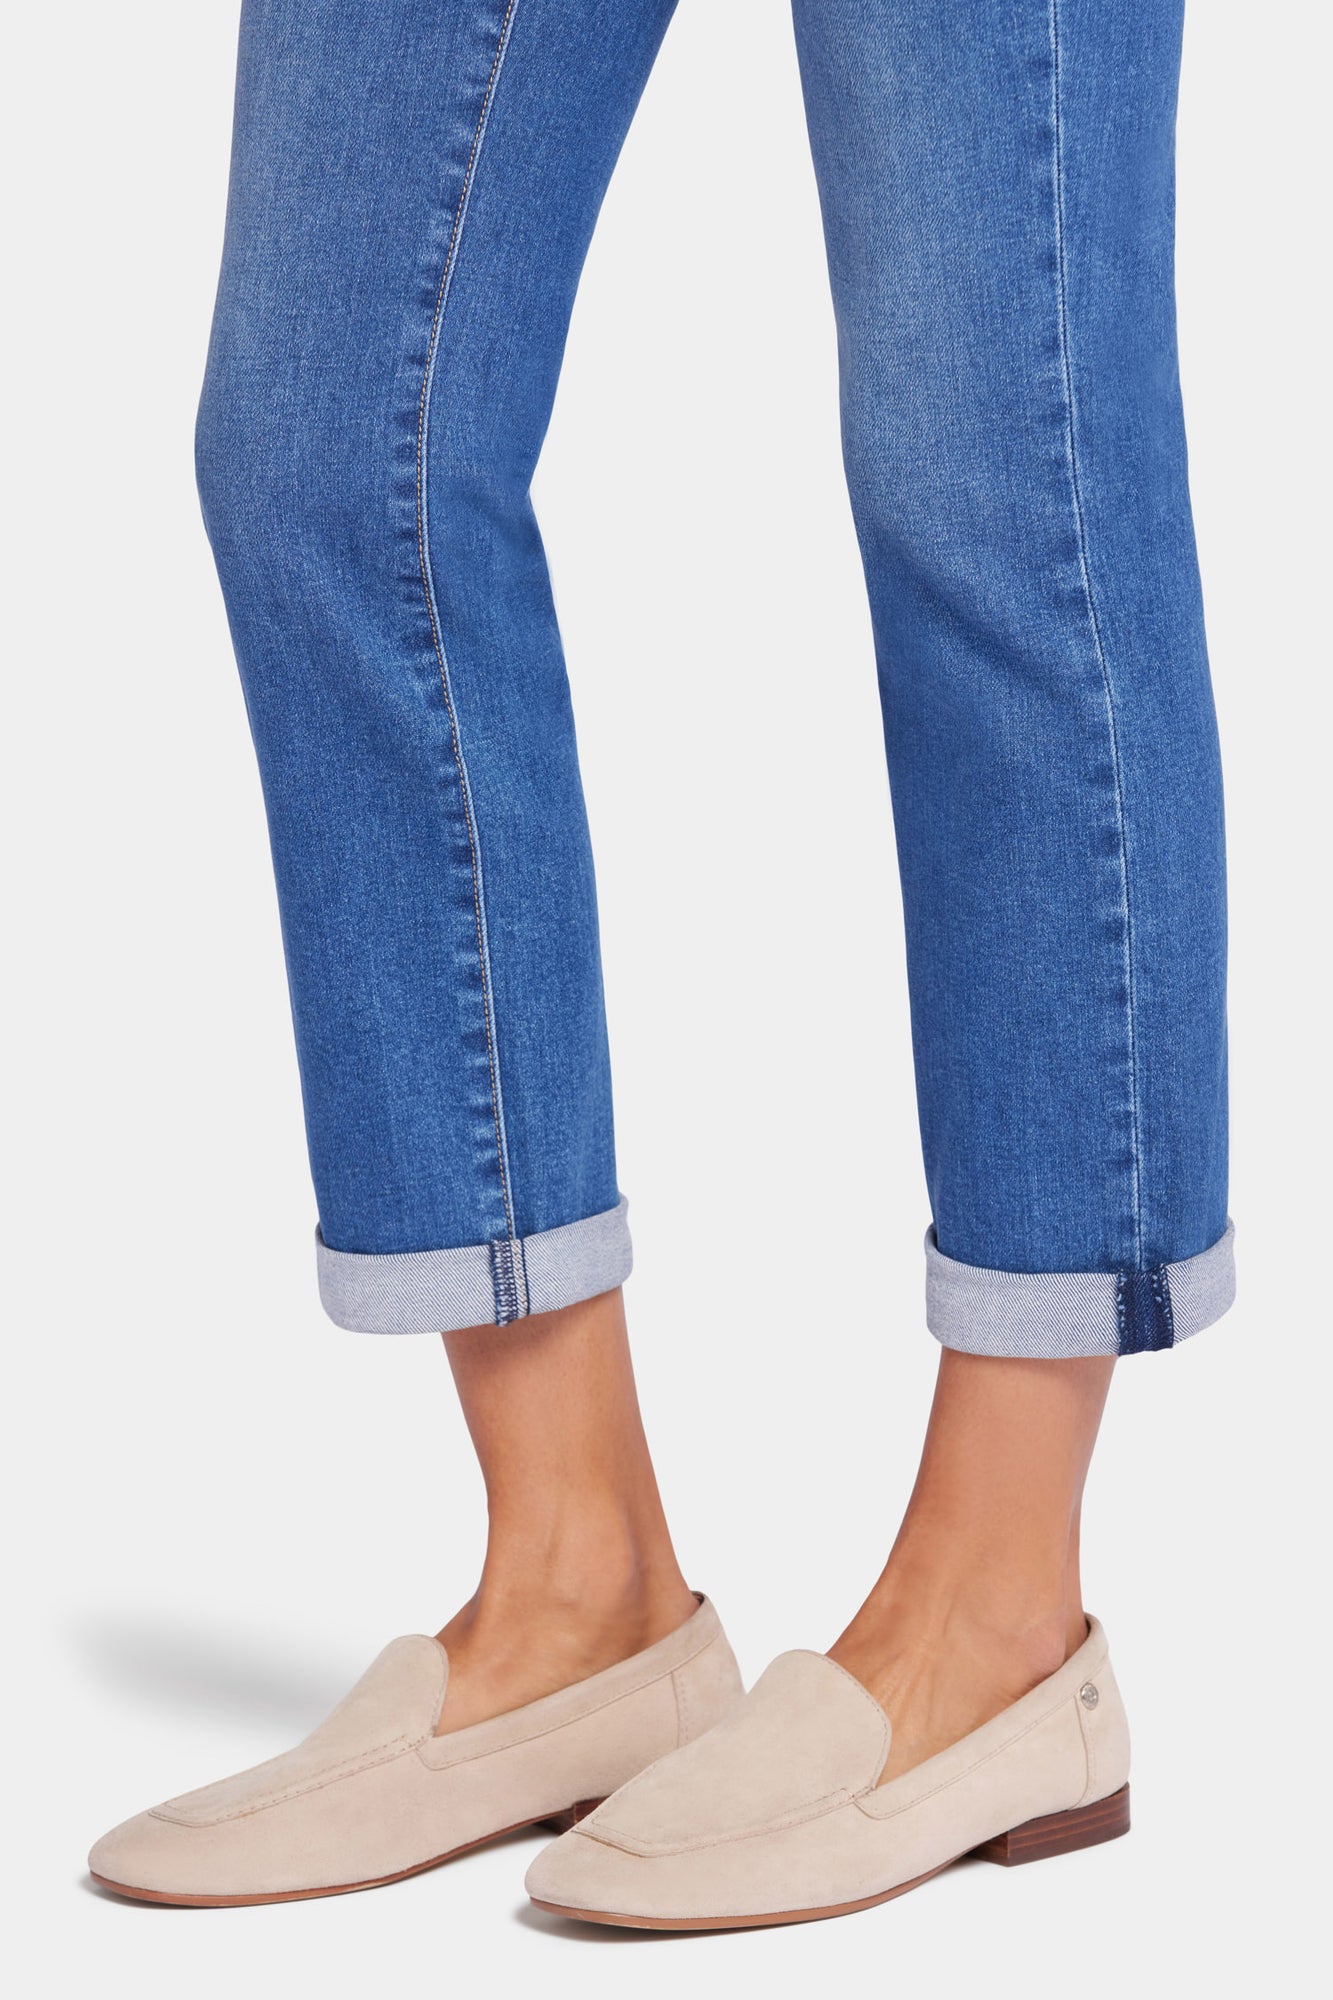 NYDJ Sheri Slim Ankle Jeans In Petite With Roll Cuffs - Rockford